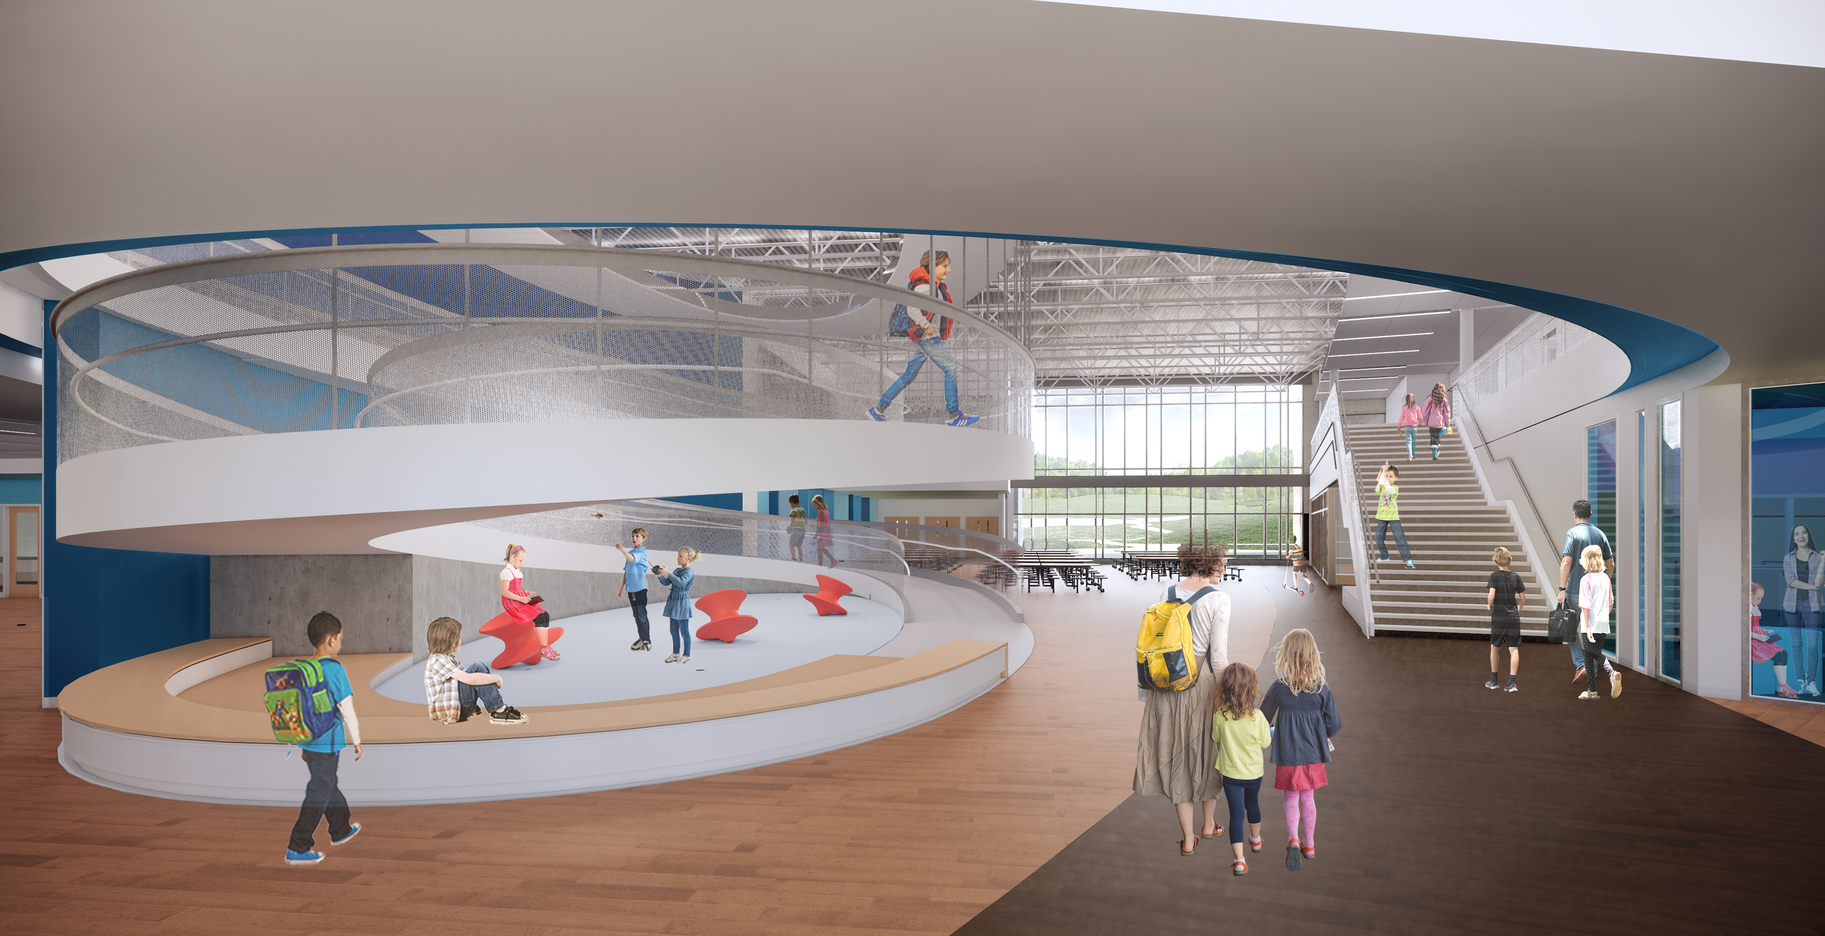 Rendering of a school lobby where a large parabolic ramp to the second floor is visible, with seating at the bottom